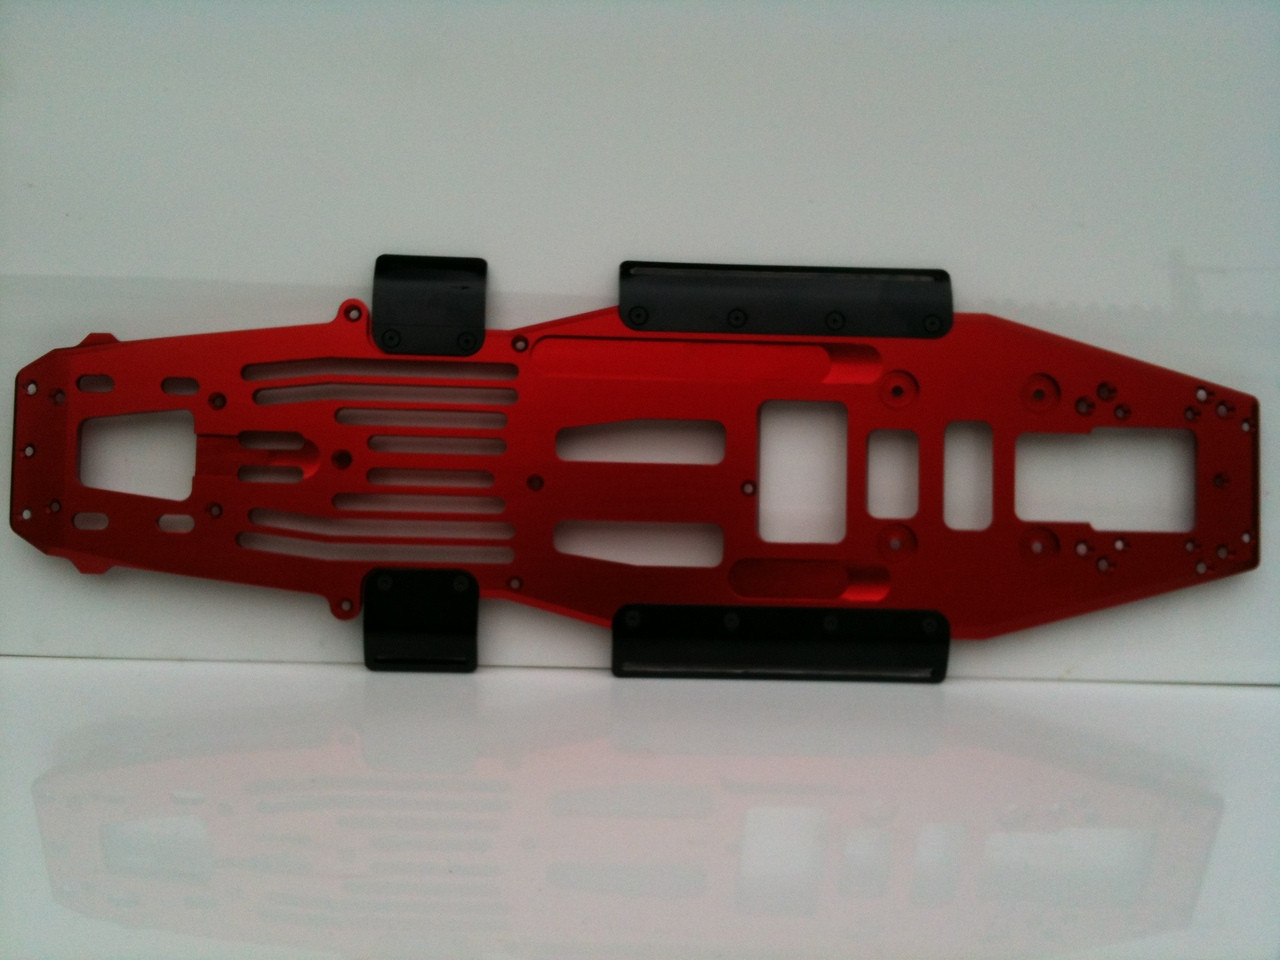 Fg 1/5th scale 465mm Long wheelbase pro alloy chassis.
Available in Red. Complete with body mounting side plates these are provided with each chassis and all fixing screws.